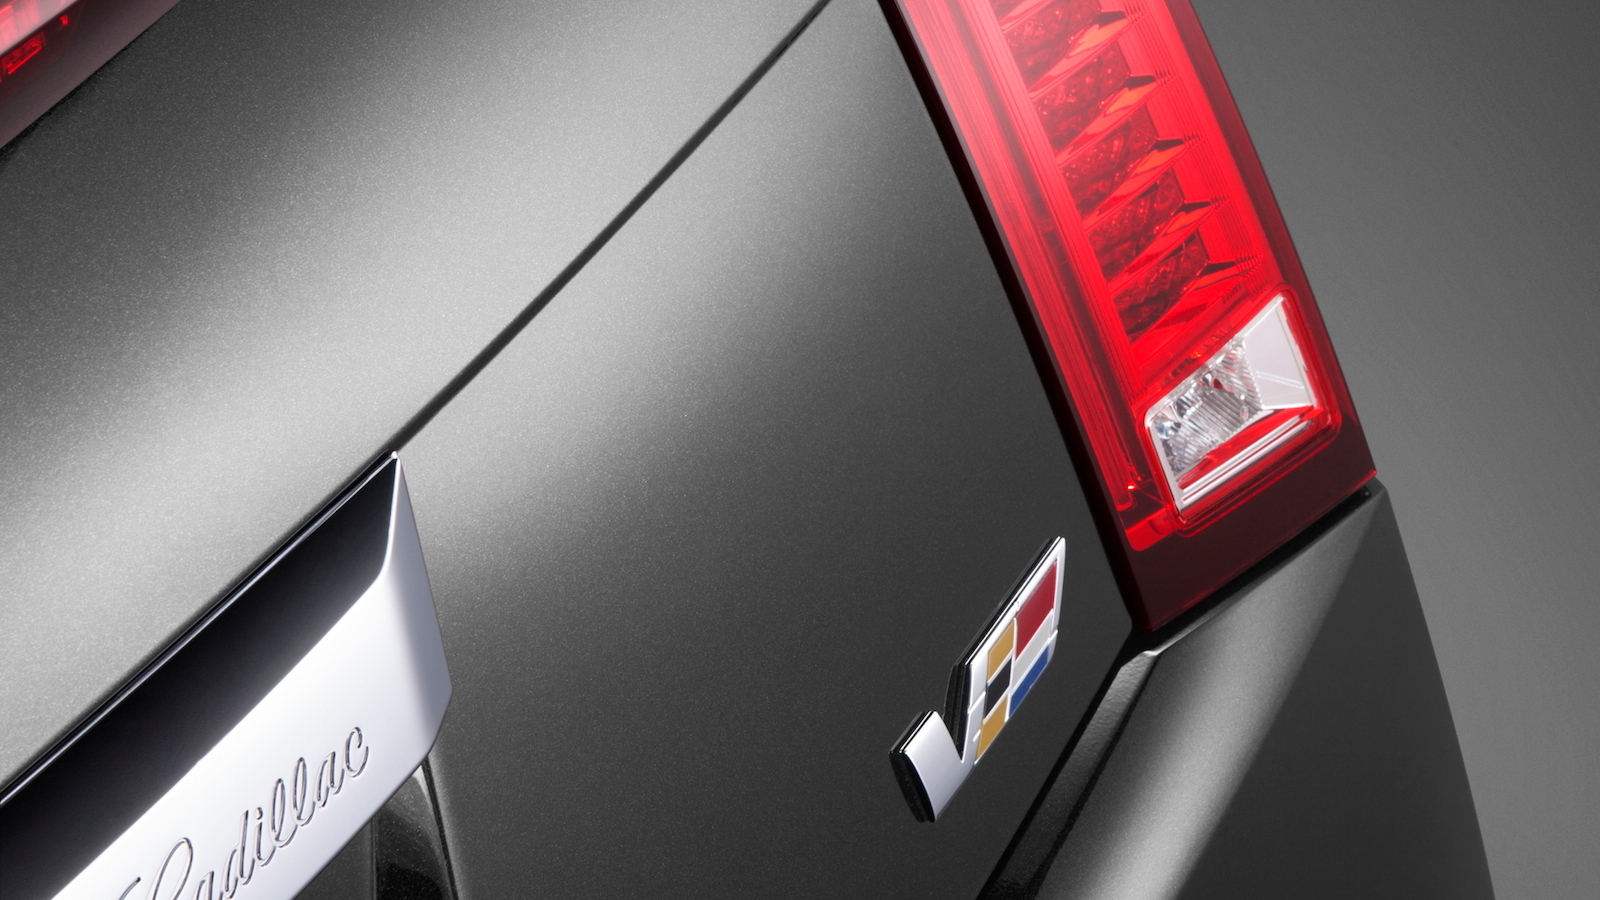 2015 Cadillac CTS-V Coupe special edition